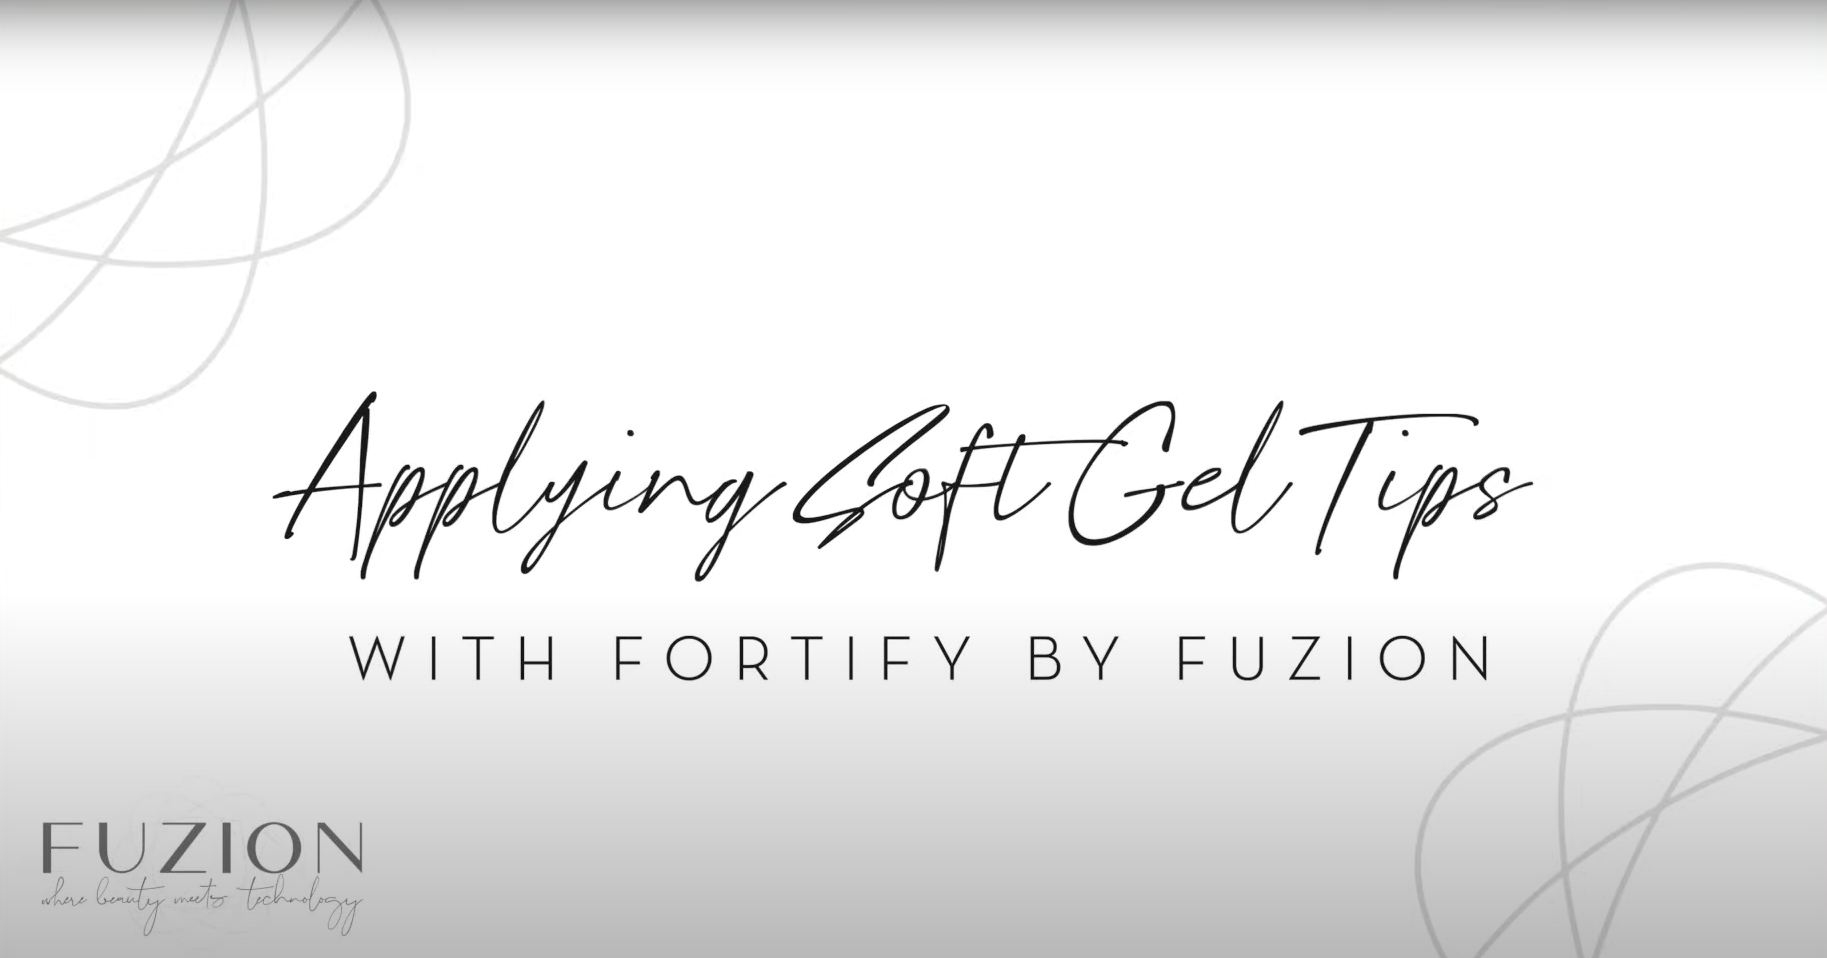 How to Apply NEW Fuzion Soft Gel Tips with Fortify!